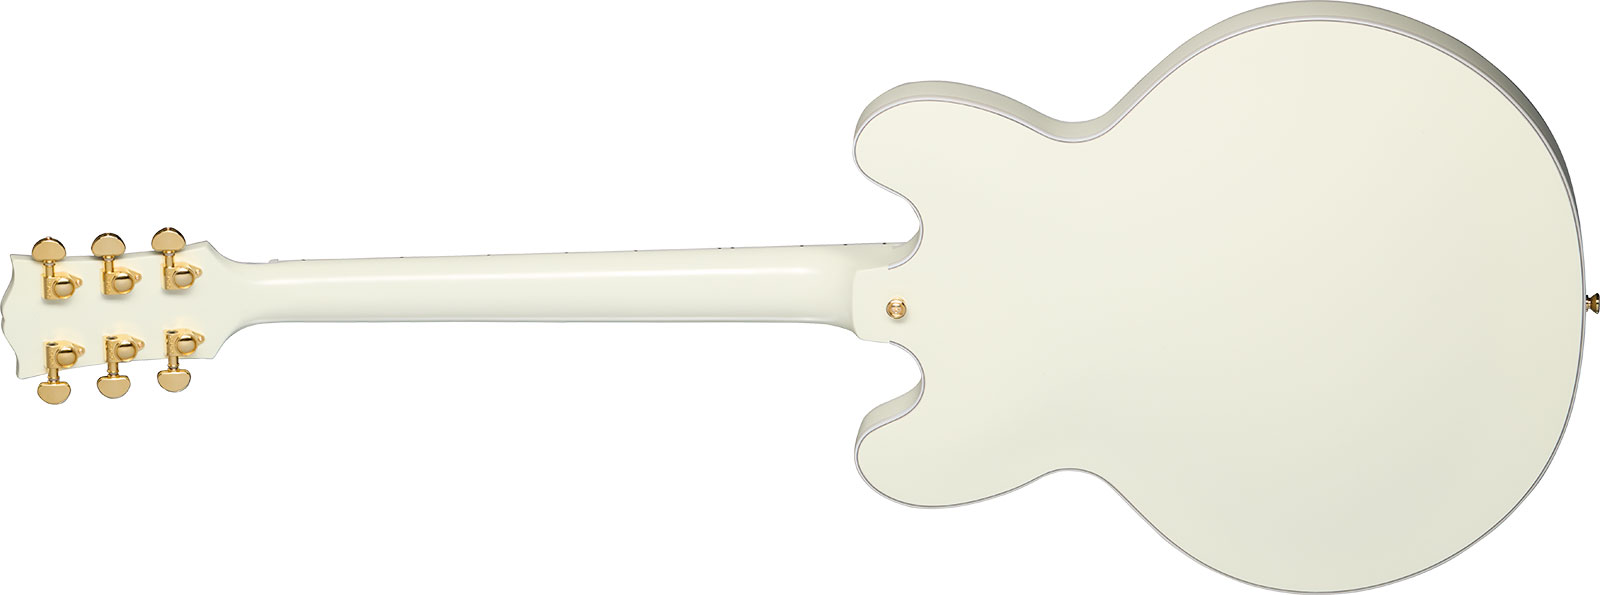 Epiphone Es355 1959 Inspired By 2h Gibson Ht Eb - Vos Classic White - Guitarra eléctrica semi caja - Variation 1